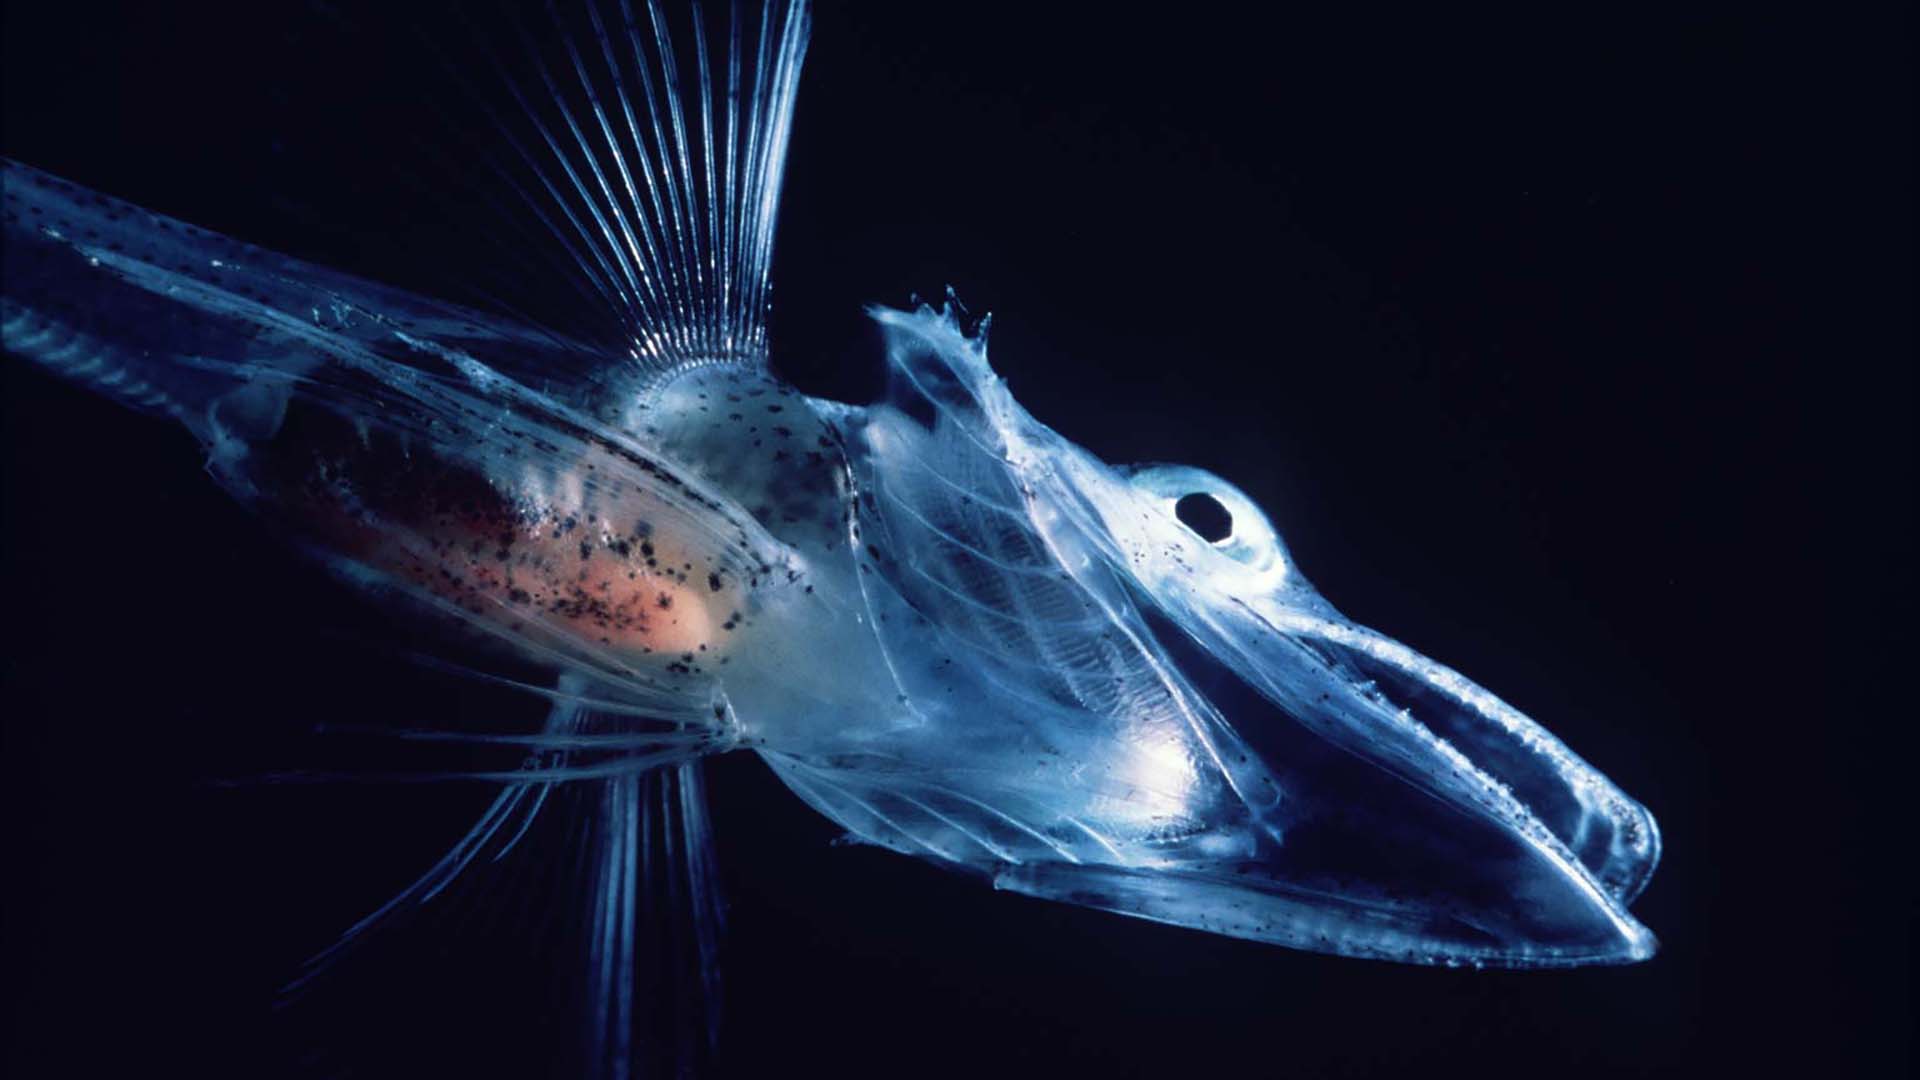 There are over 16 species of icefish that use a type of antifreeze protein to stay alive in their freezing polar habitat. (Photo courtesy of Wikimedia Commons)